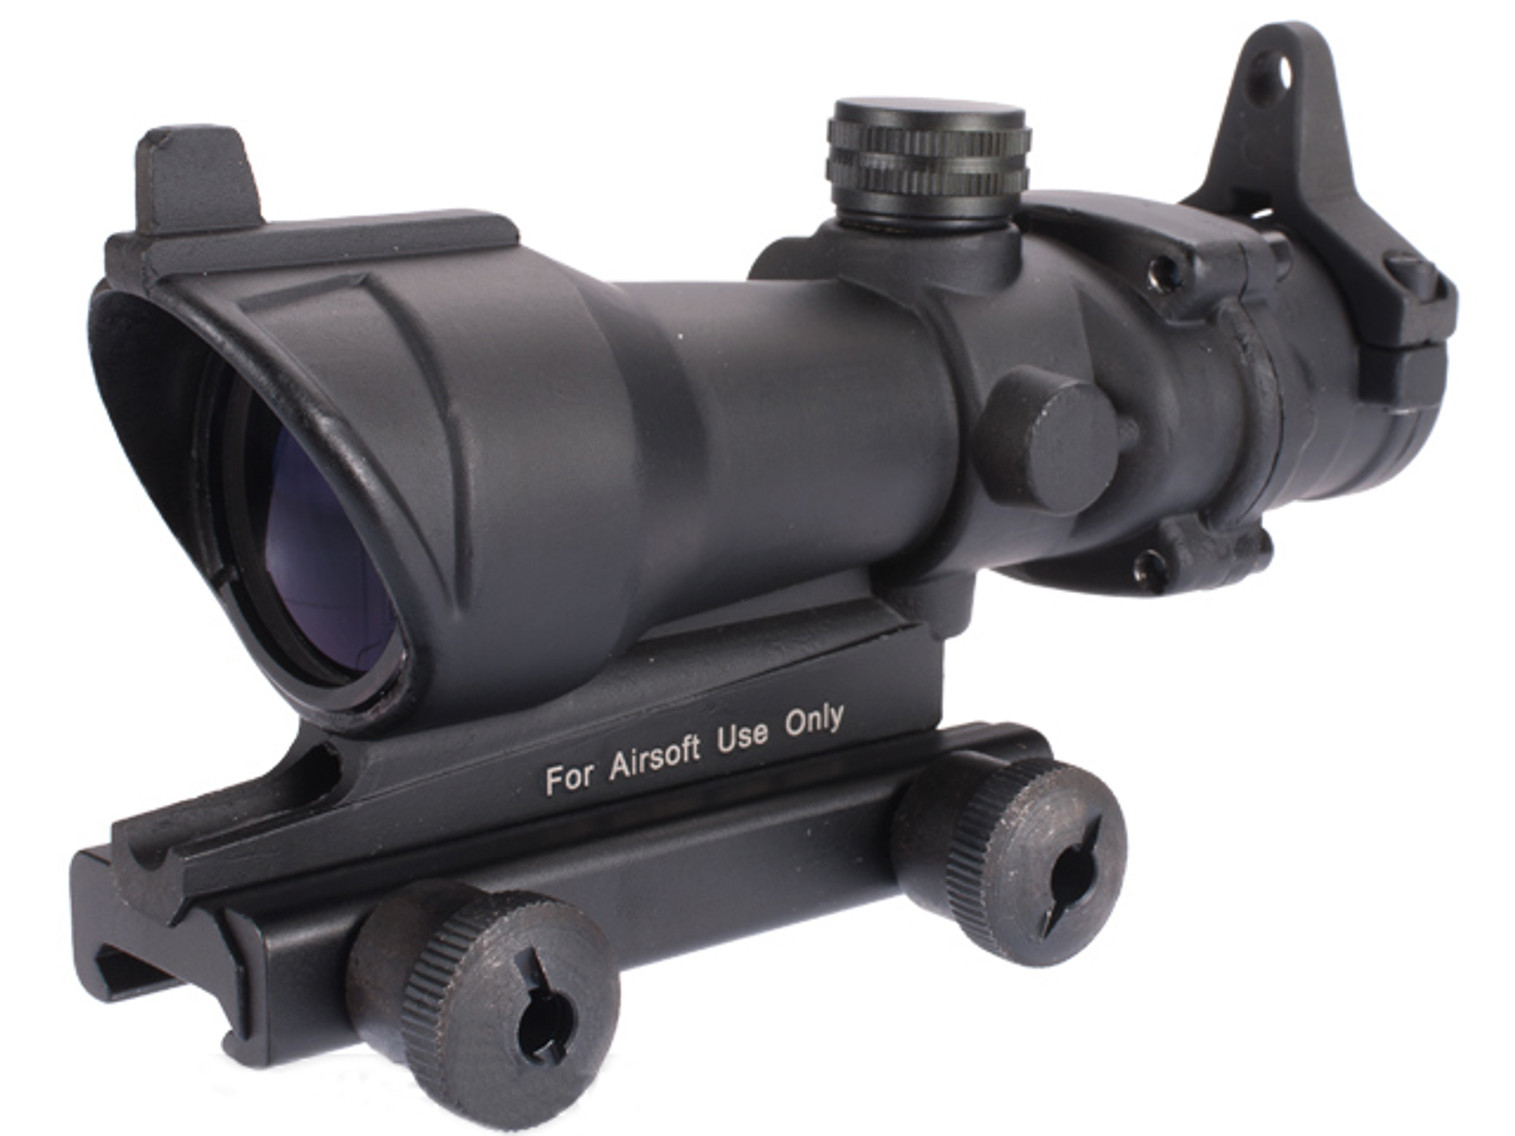 G&P 4x32 Rifle Scope with Integrated Iron Sight & Weaver Mount